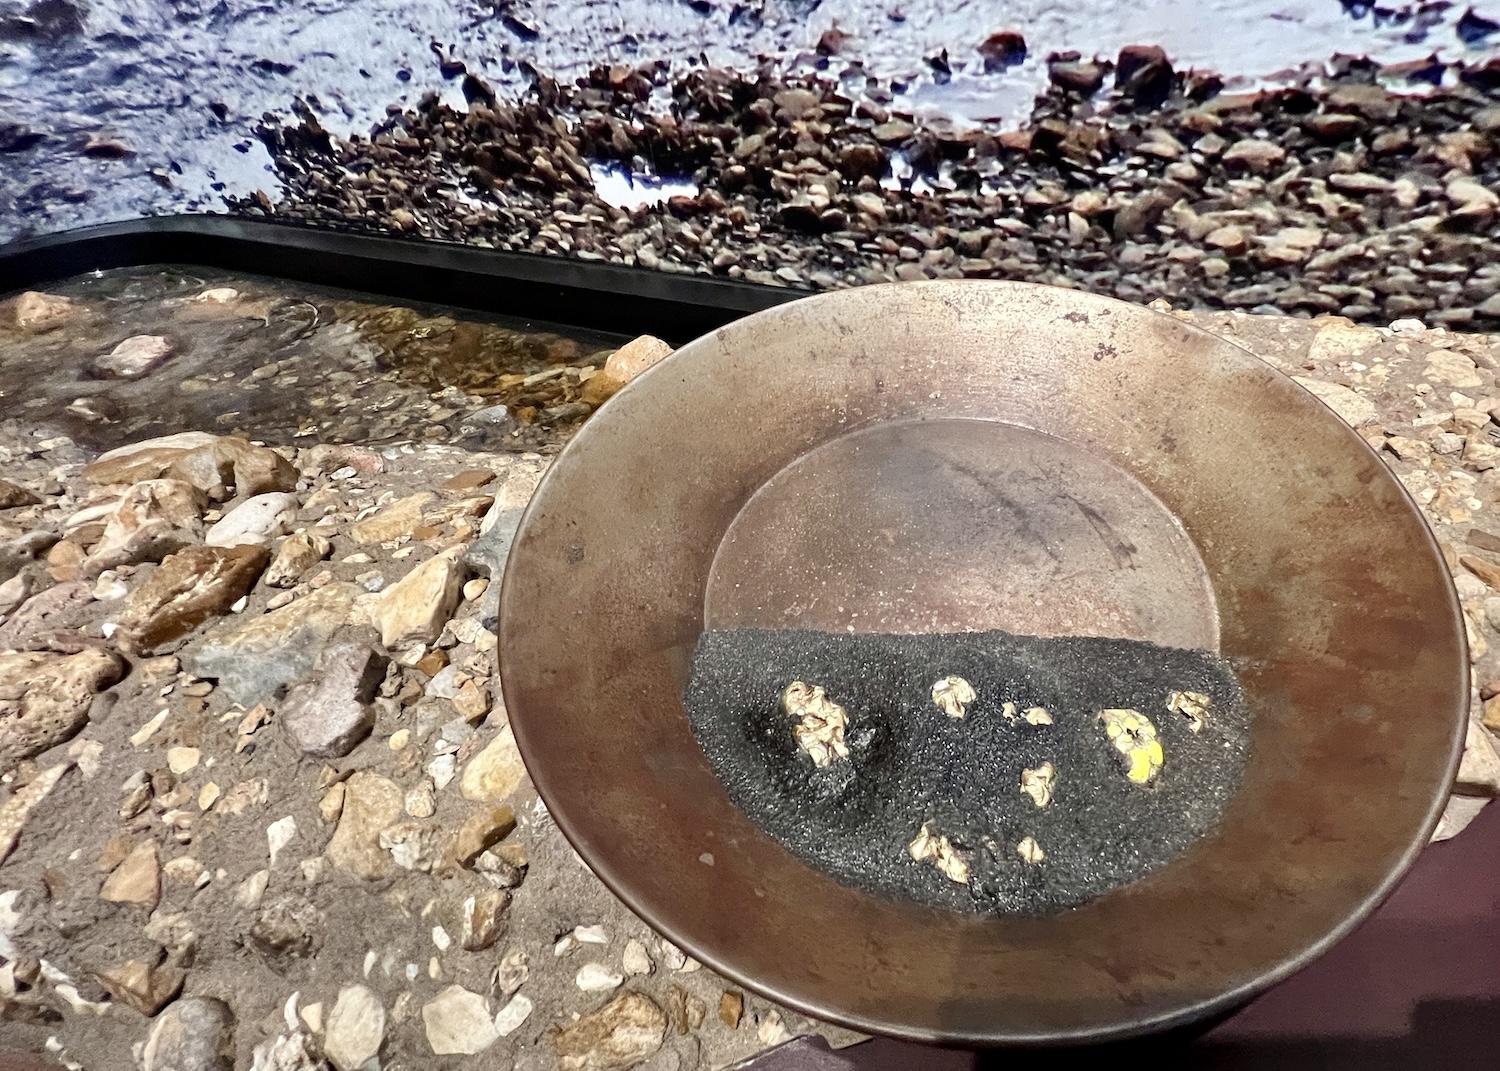 Panning was known as the "poor man's method" since nearly anyone could afford a gold pan.